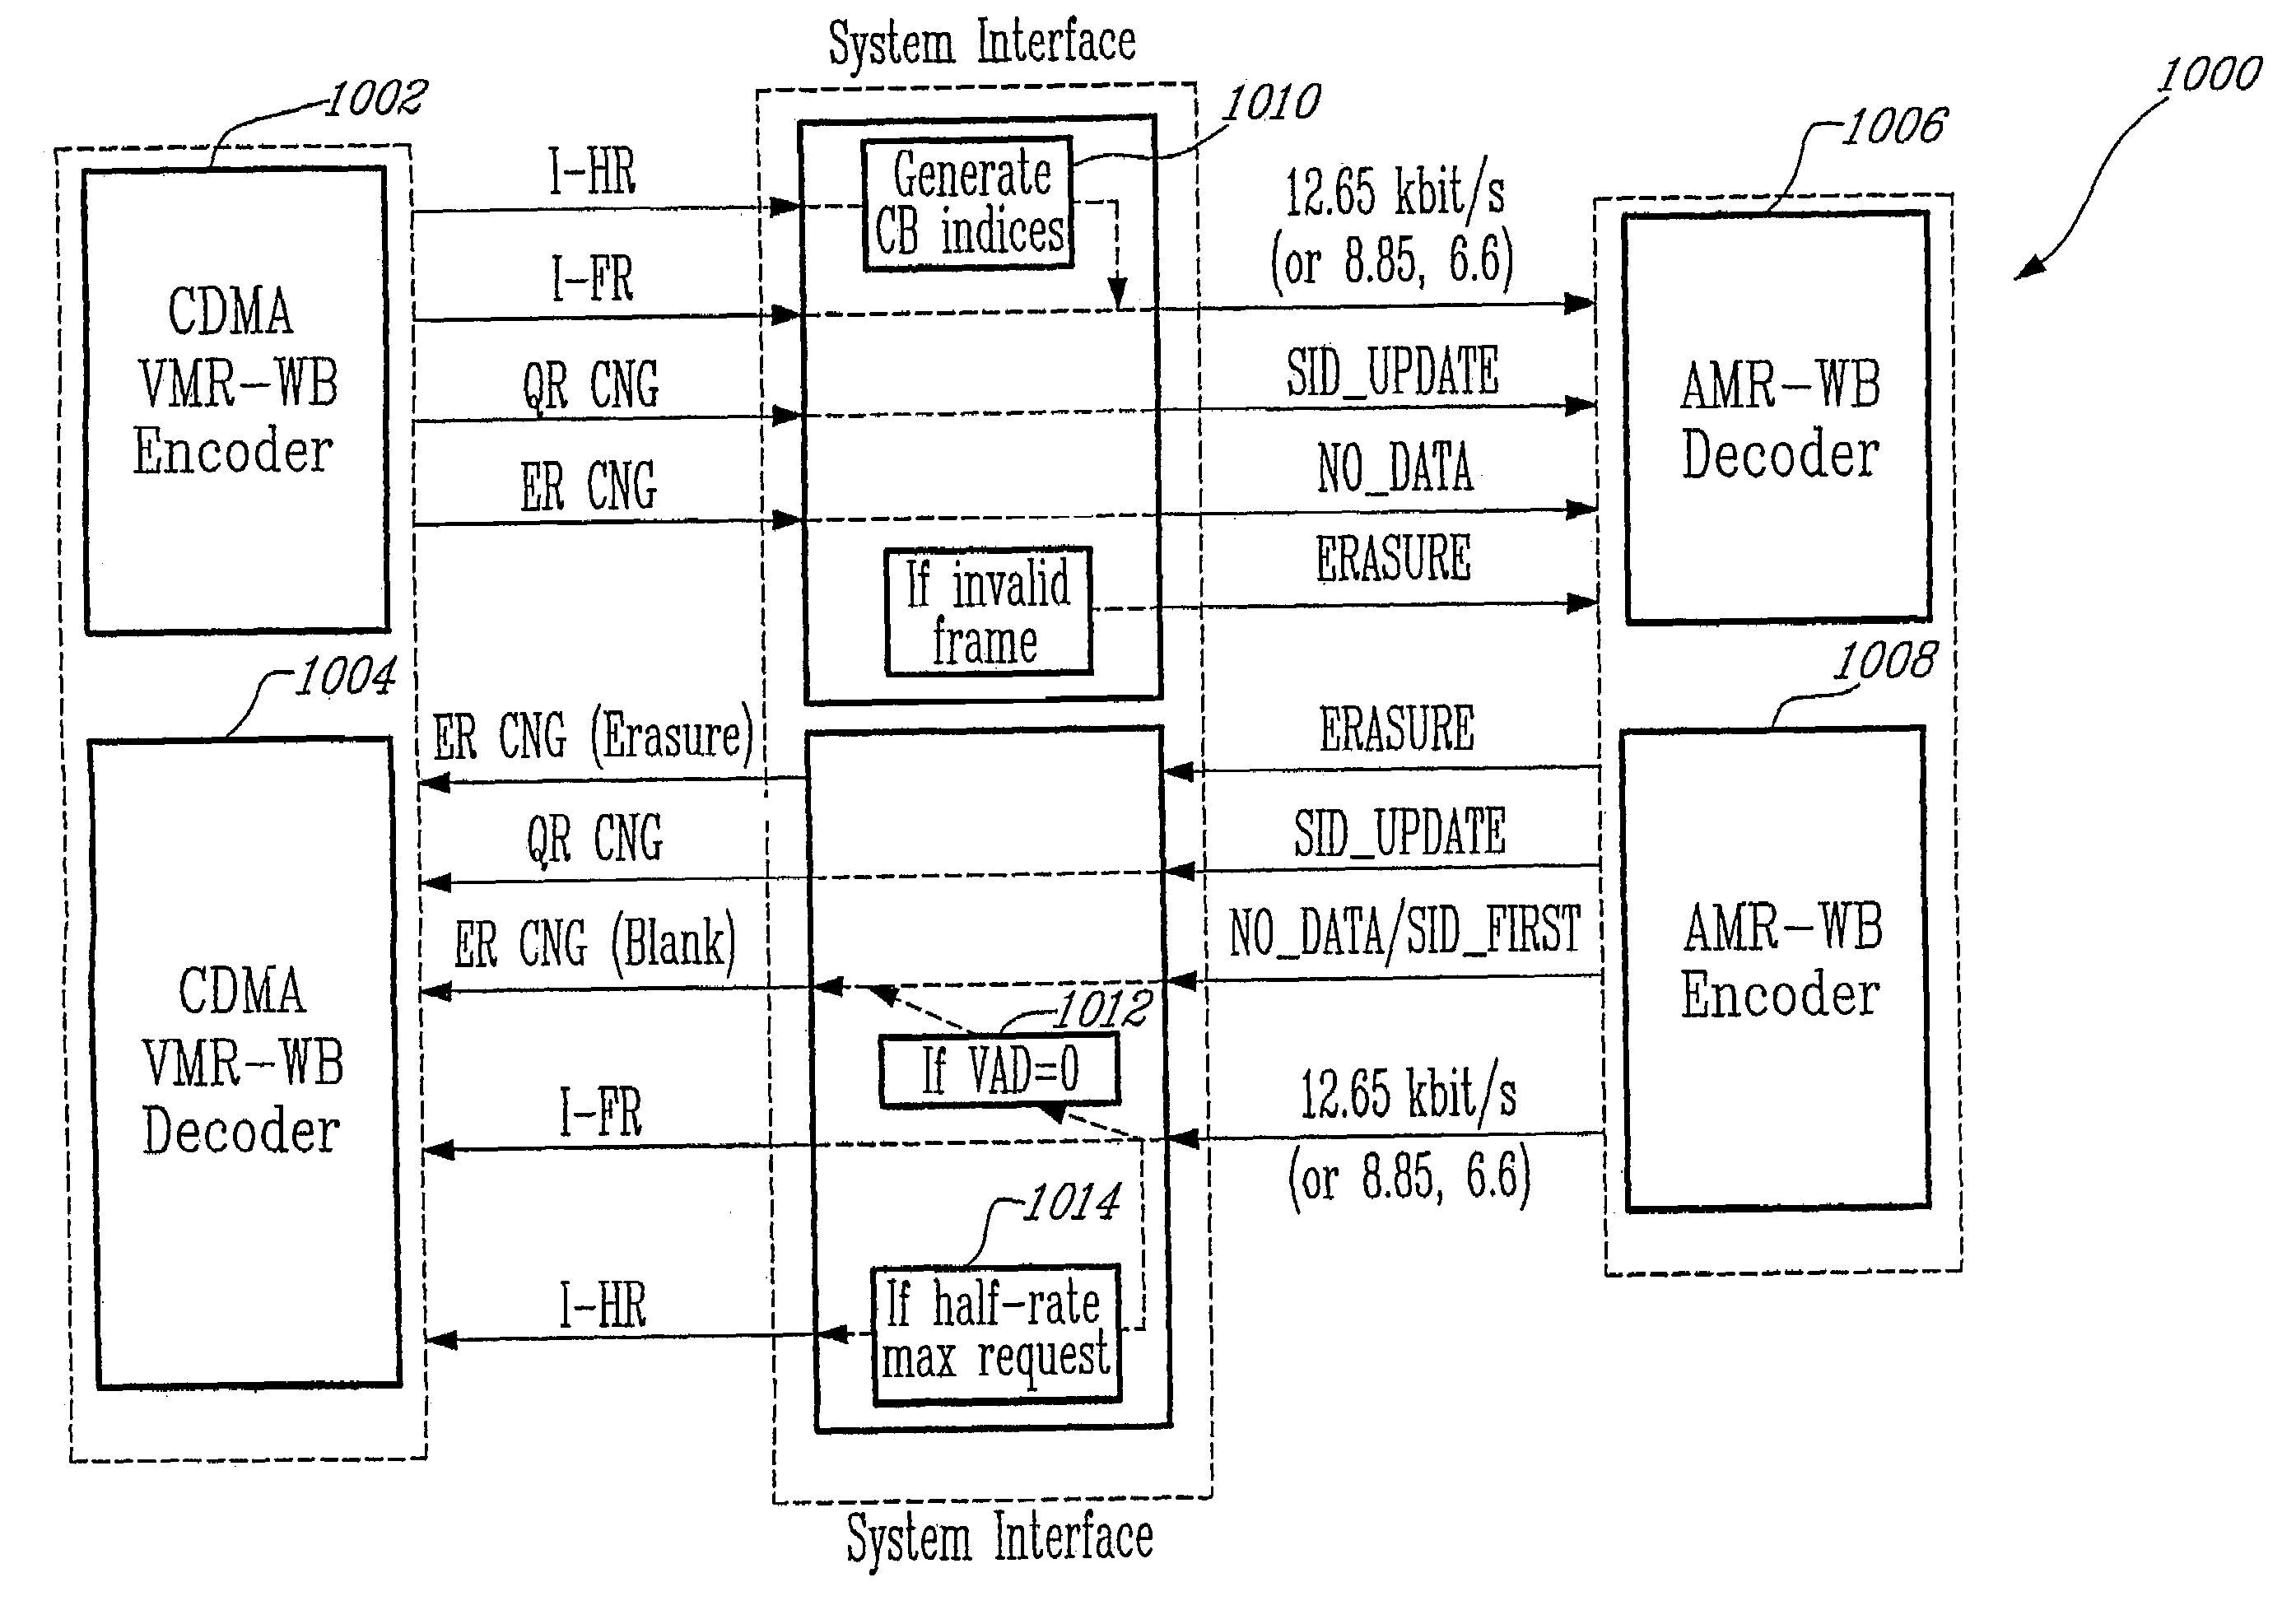 Method for interoperation between adaptive multi-rate wideband (AMR-WB) and multi-mode variable bit-rate wideband (VMR-WB) codecs